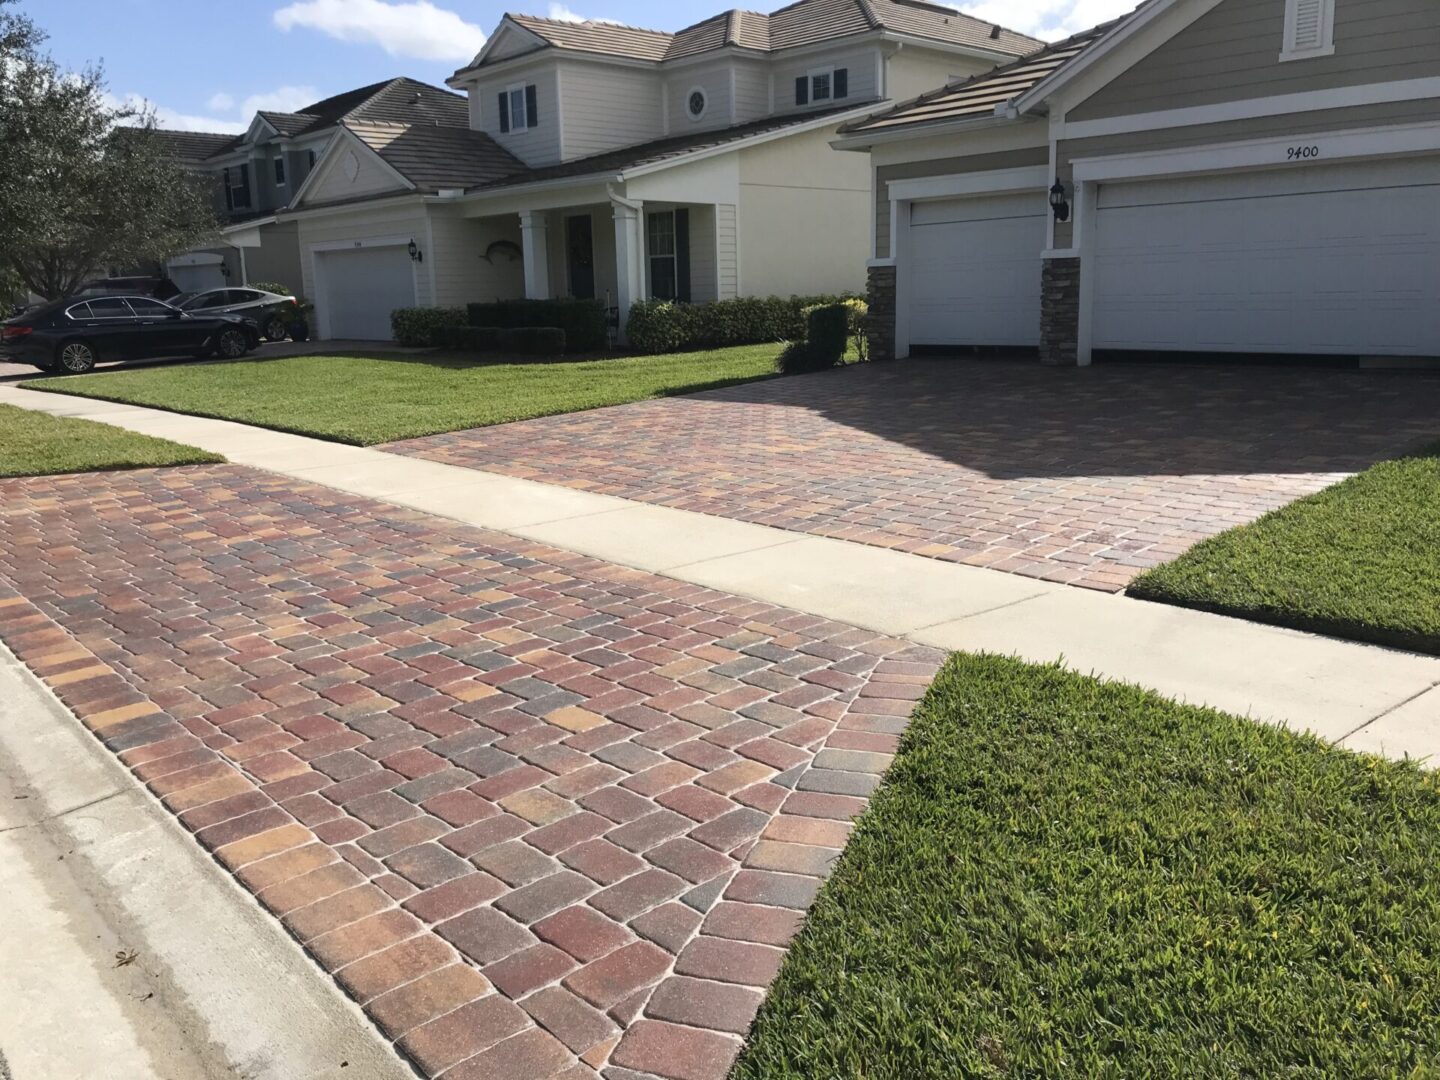 A driveway with brick and grass in the middle of it.